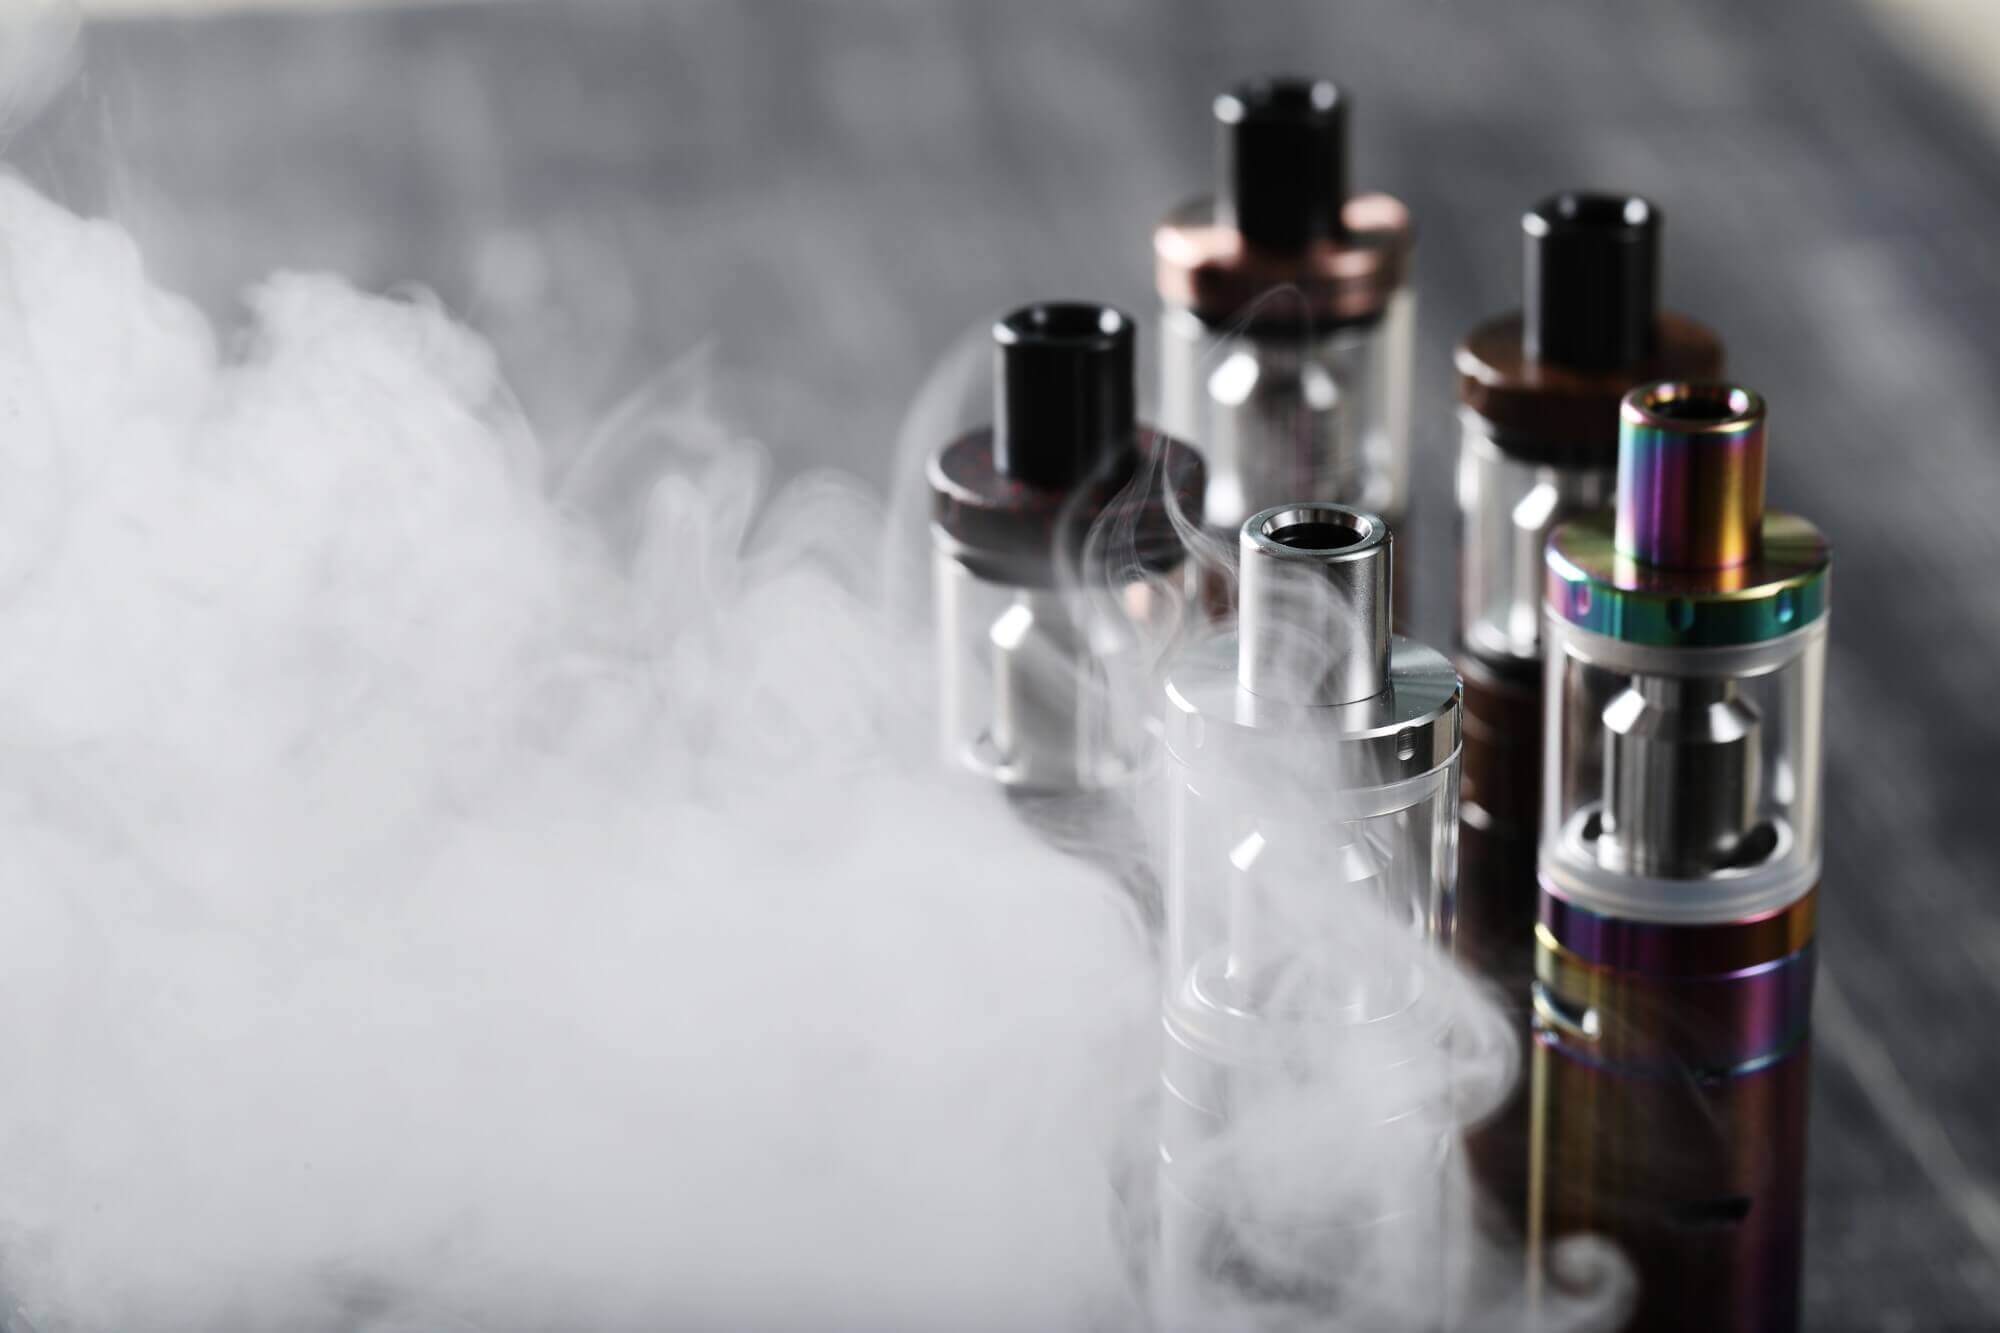 Healthway Medical Network | The Burning Question: Smoking or Vaping - Which is Safer?